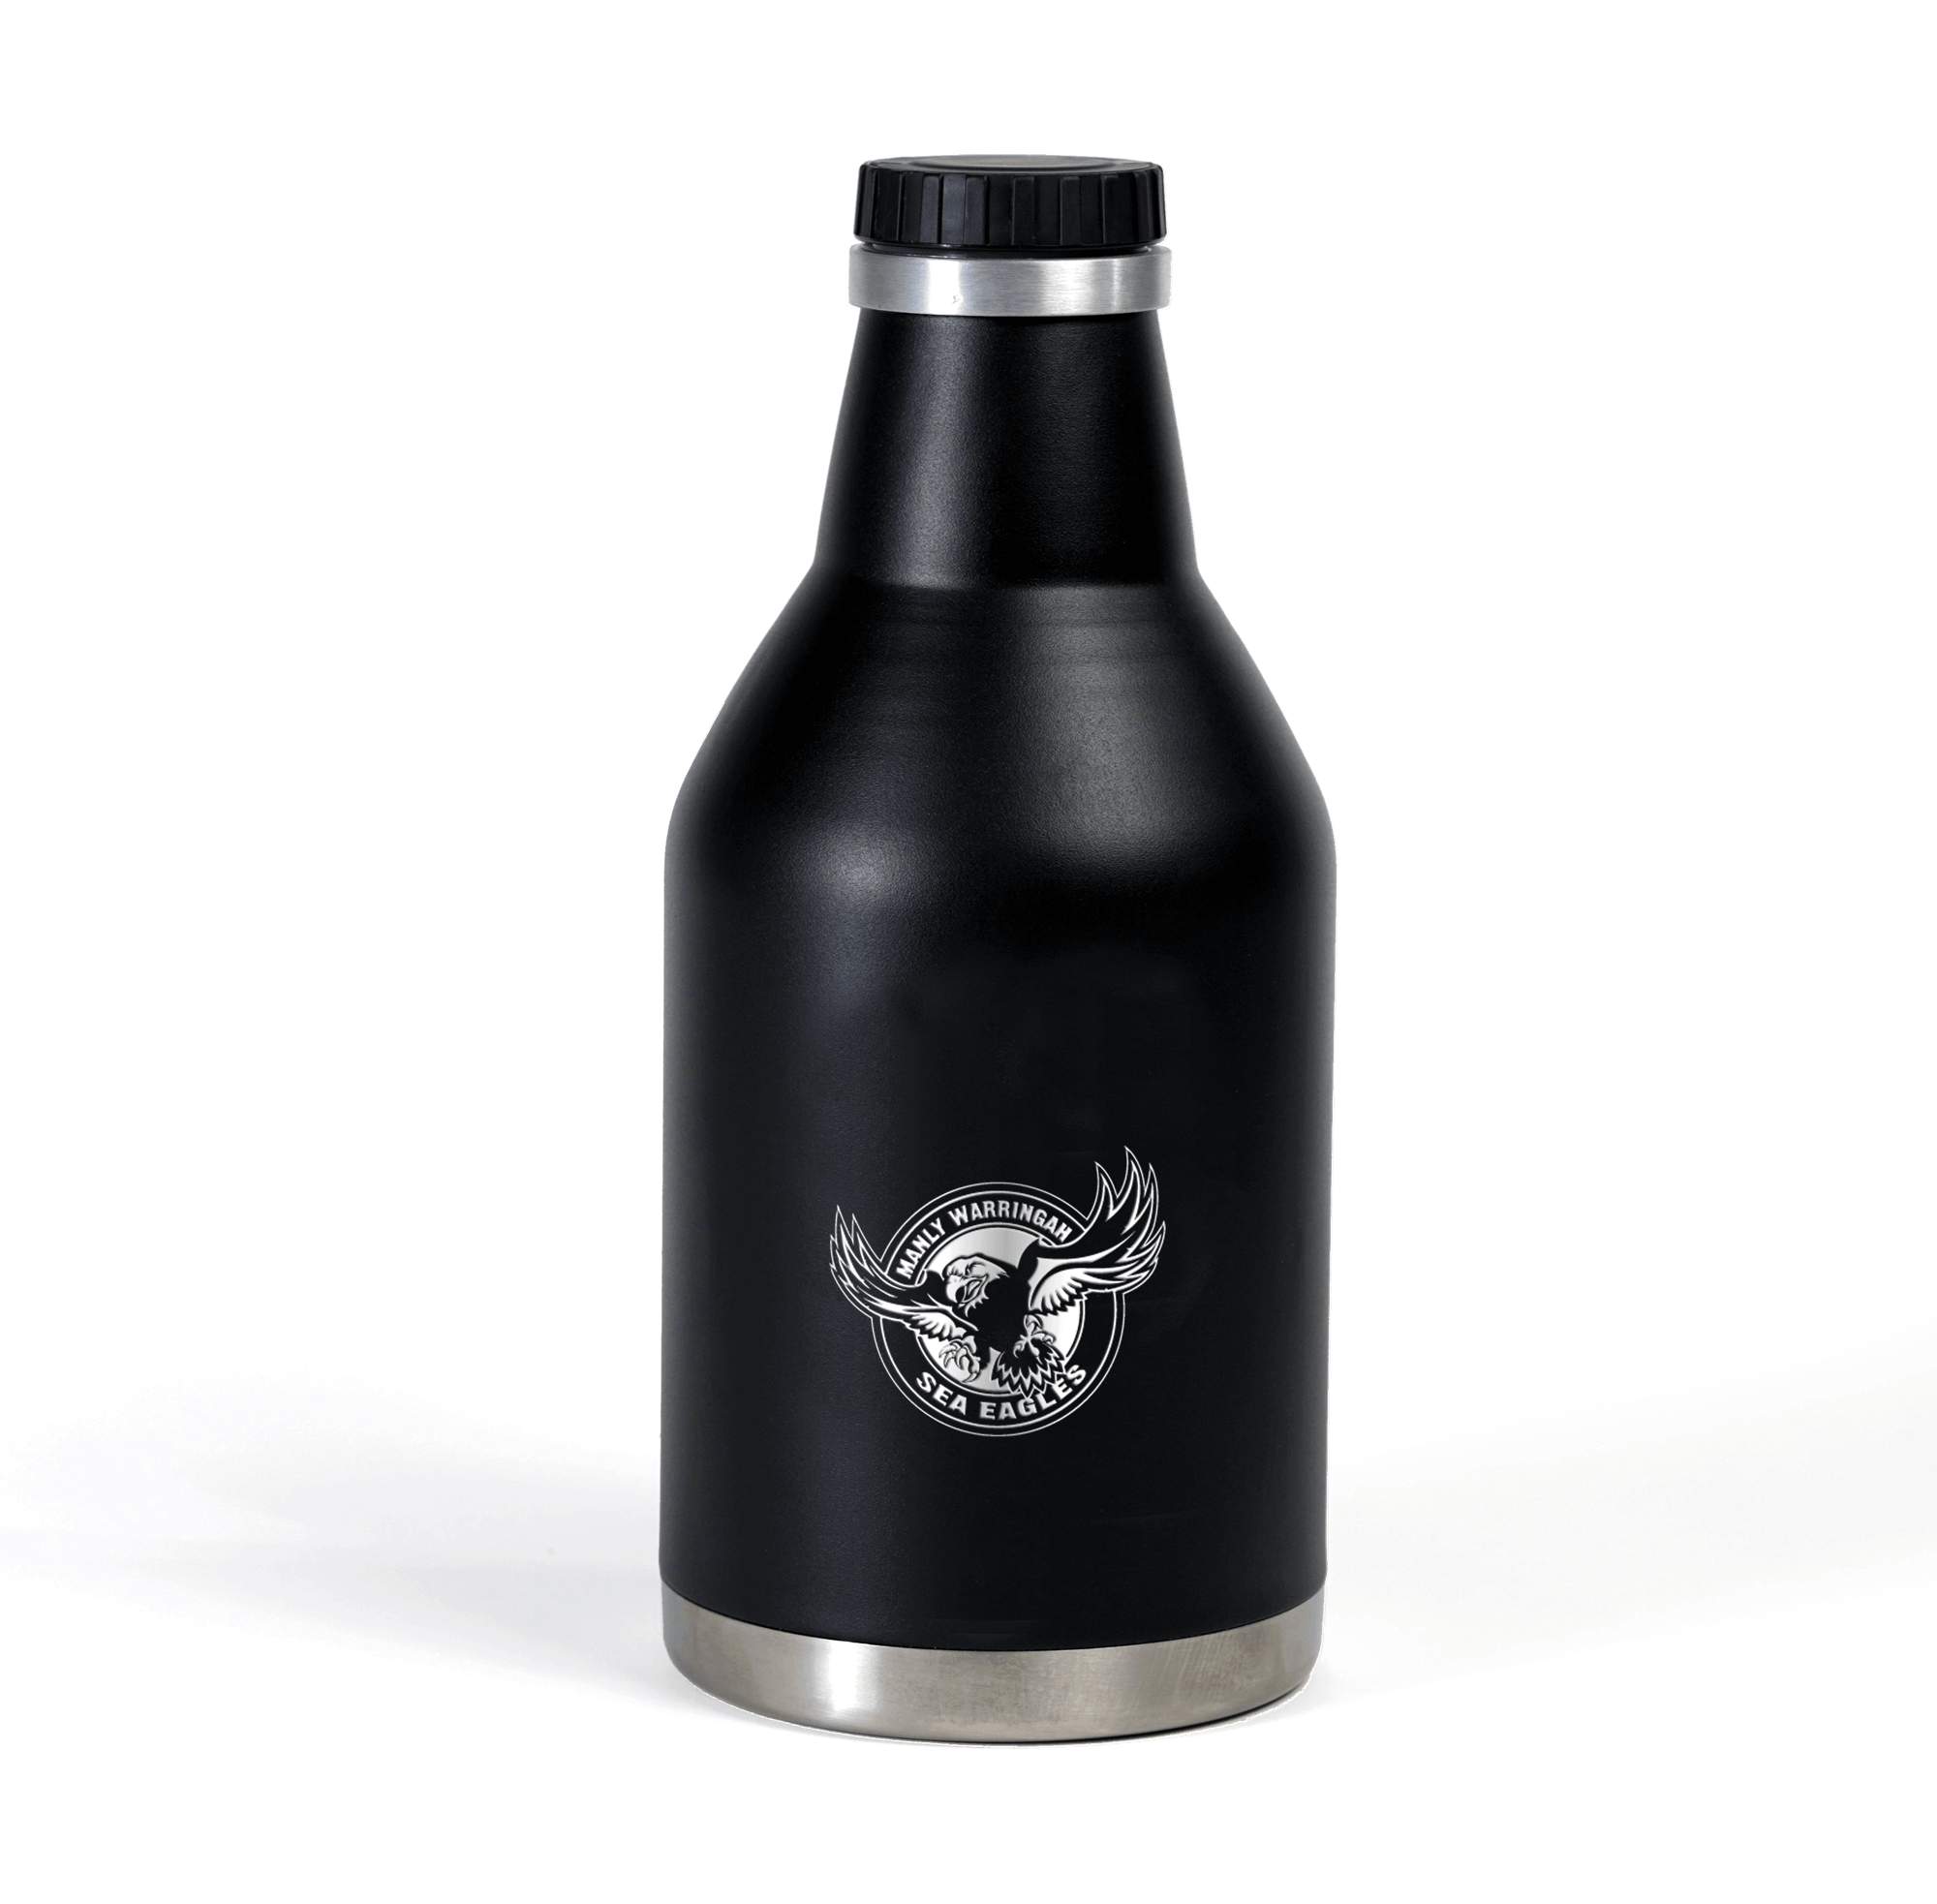 MANLY SEA EAGLES NRL BEER GROWLER_MANLY SEA EAGLES_STUBBY CLUB